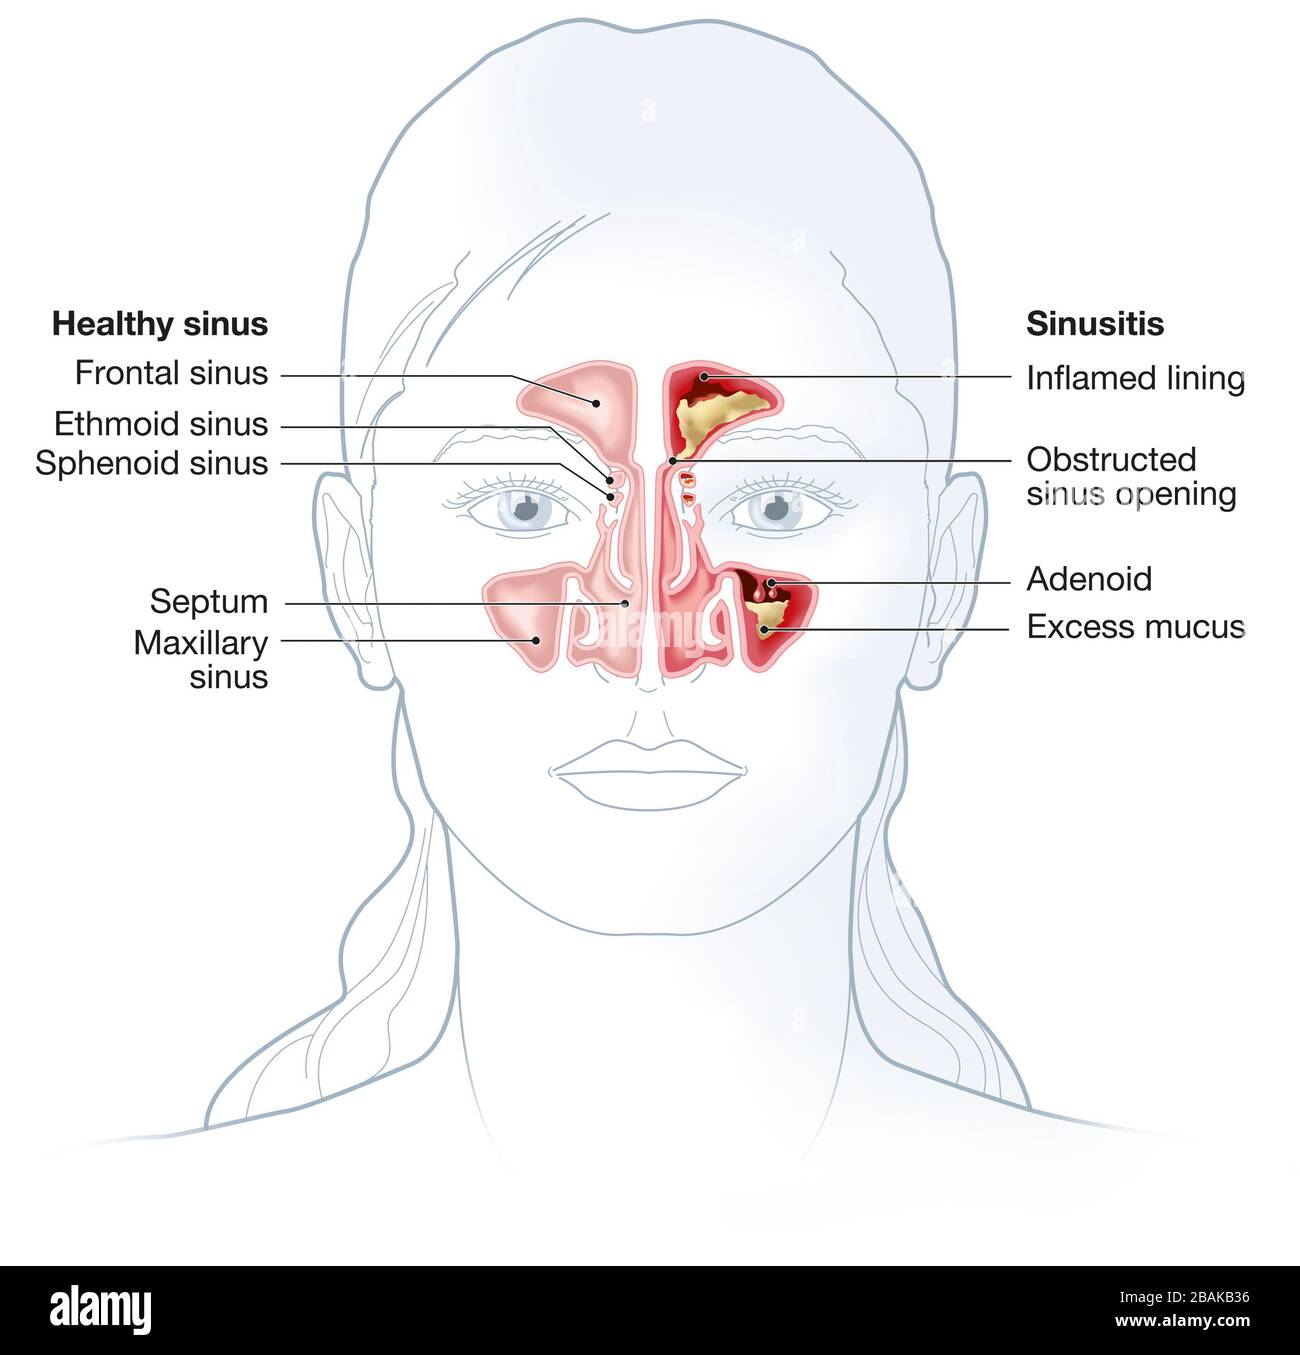 Illustration showing healthy sinus and sinusitis with inflamed lining, obstructed sinus opening, adenoid and excess mucus Stock Photo